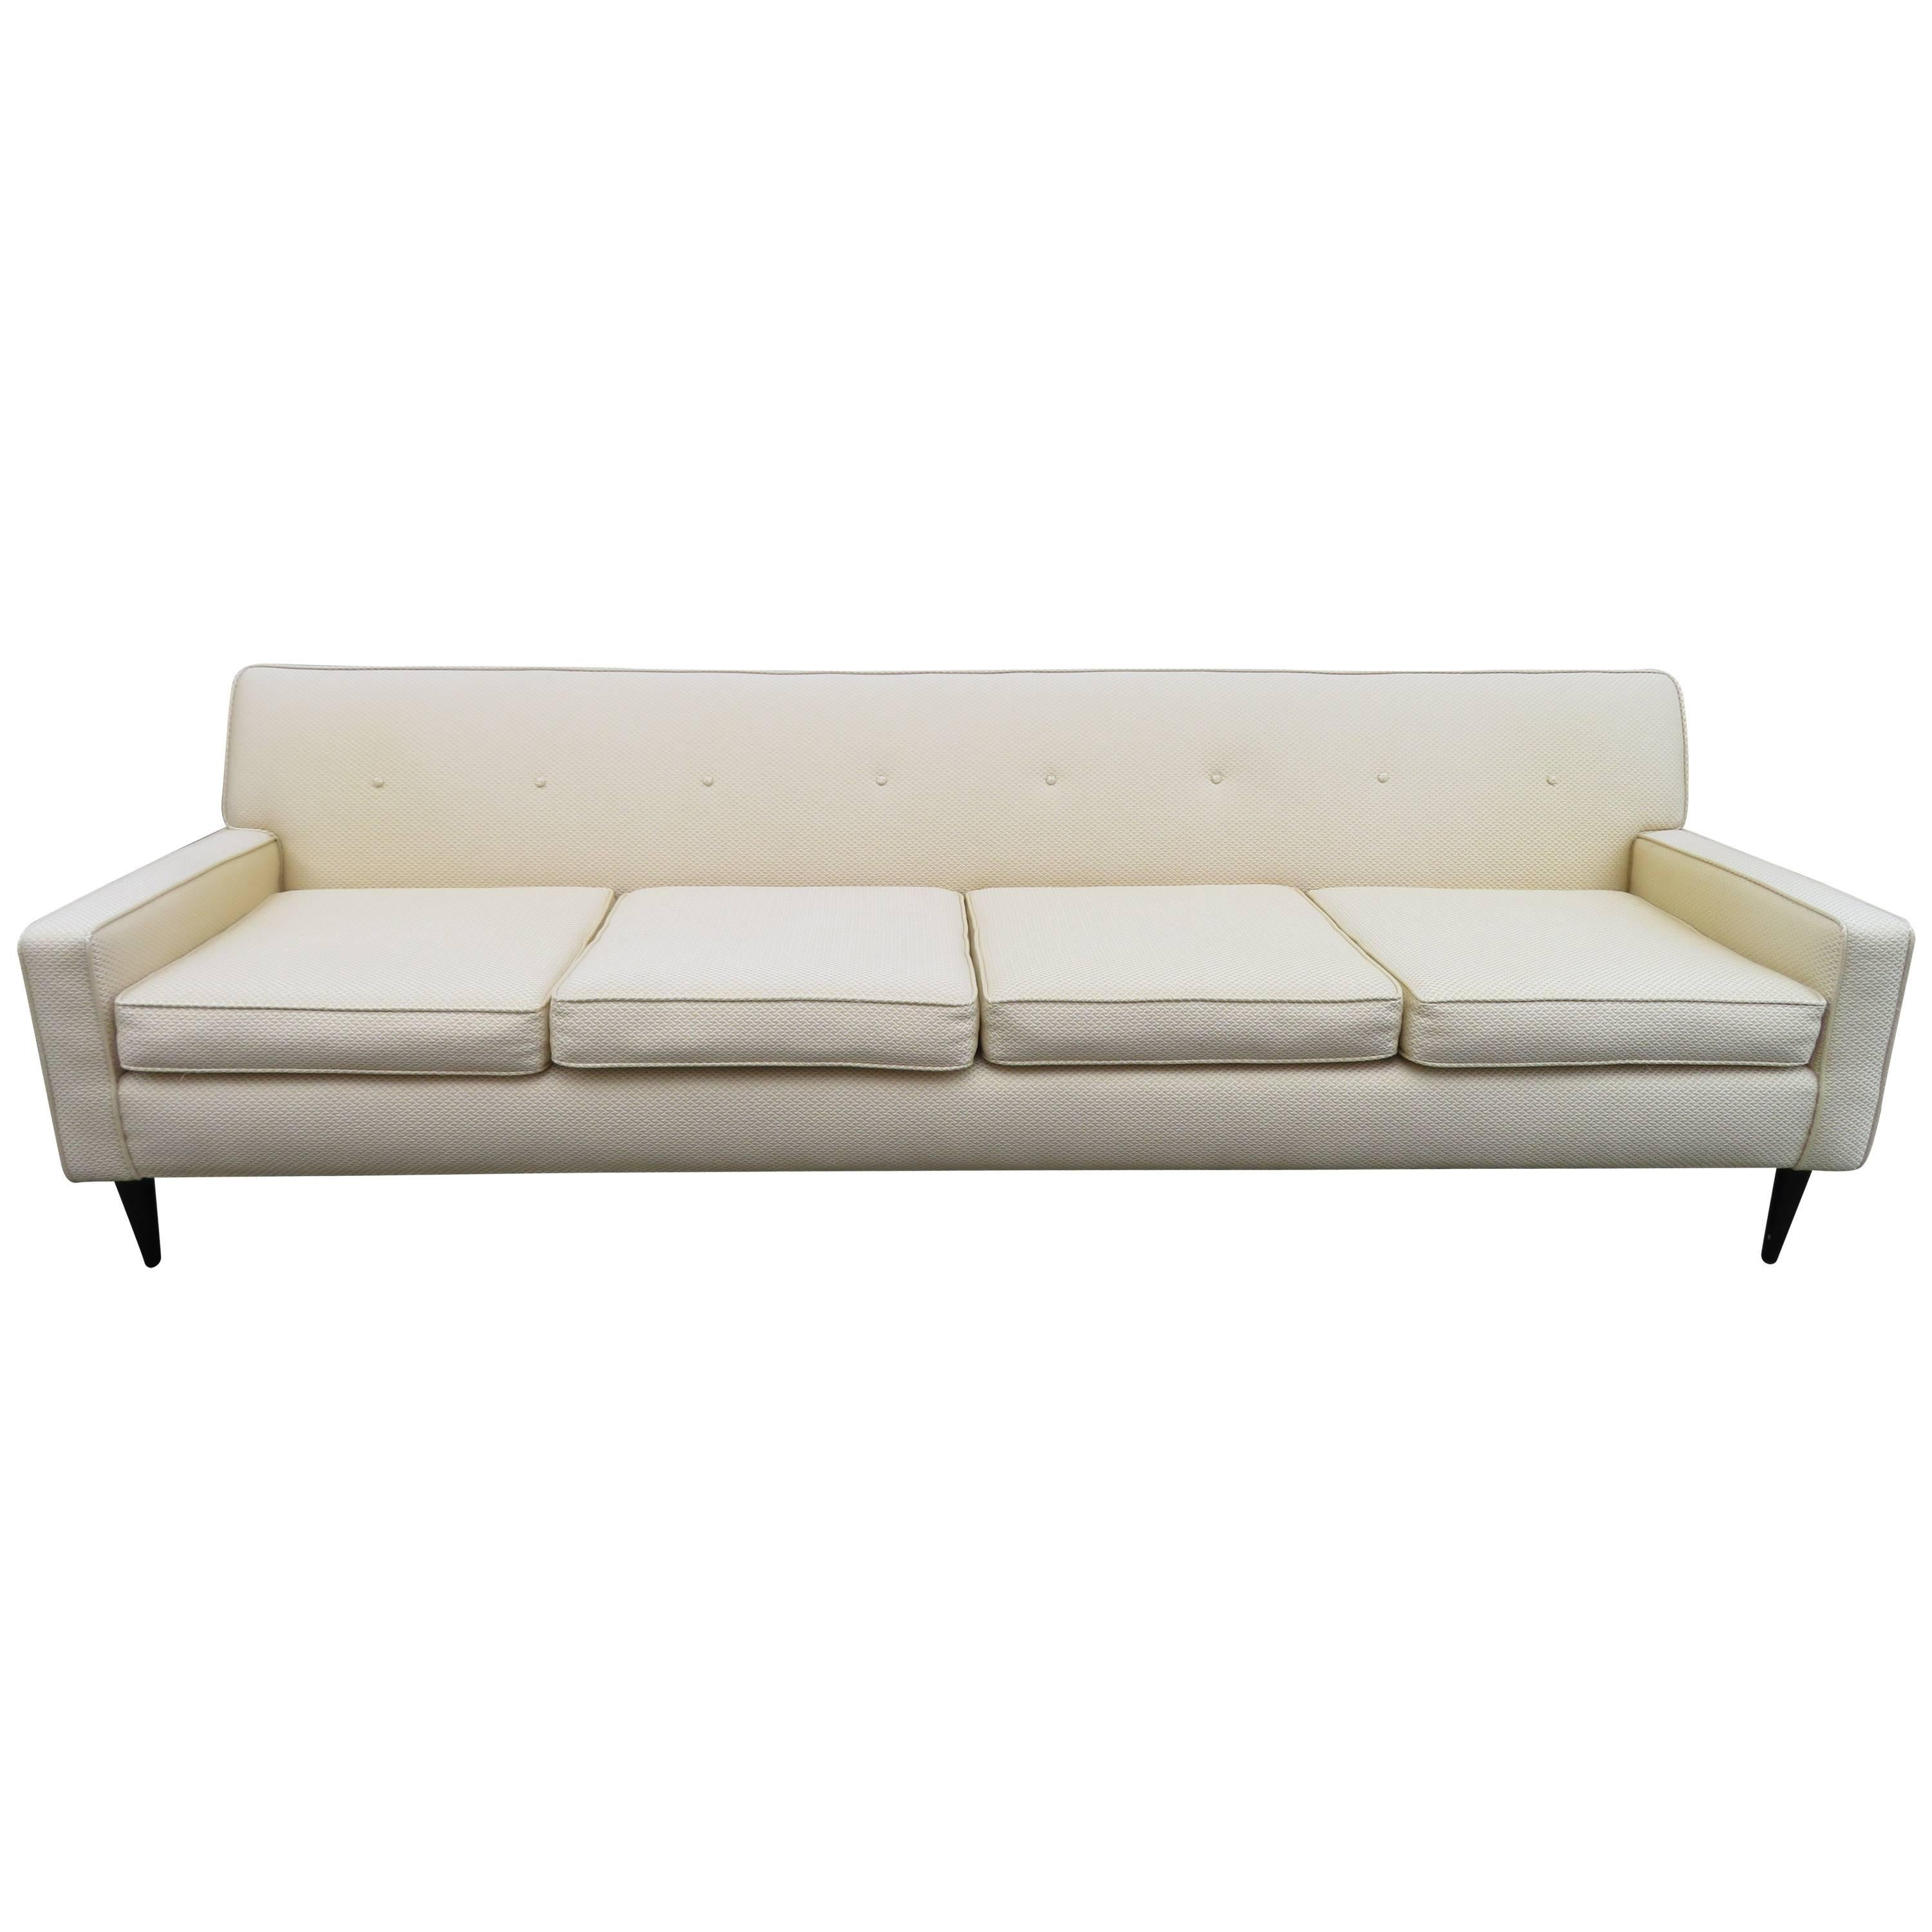 Handsome Harvey Probber Style Four-Seat Sofa, Mid-Century Modern For Sale